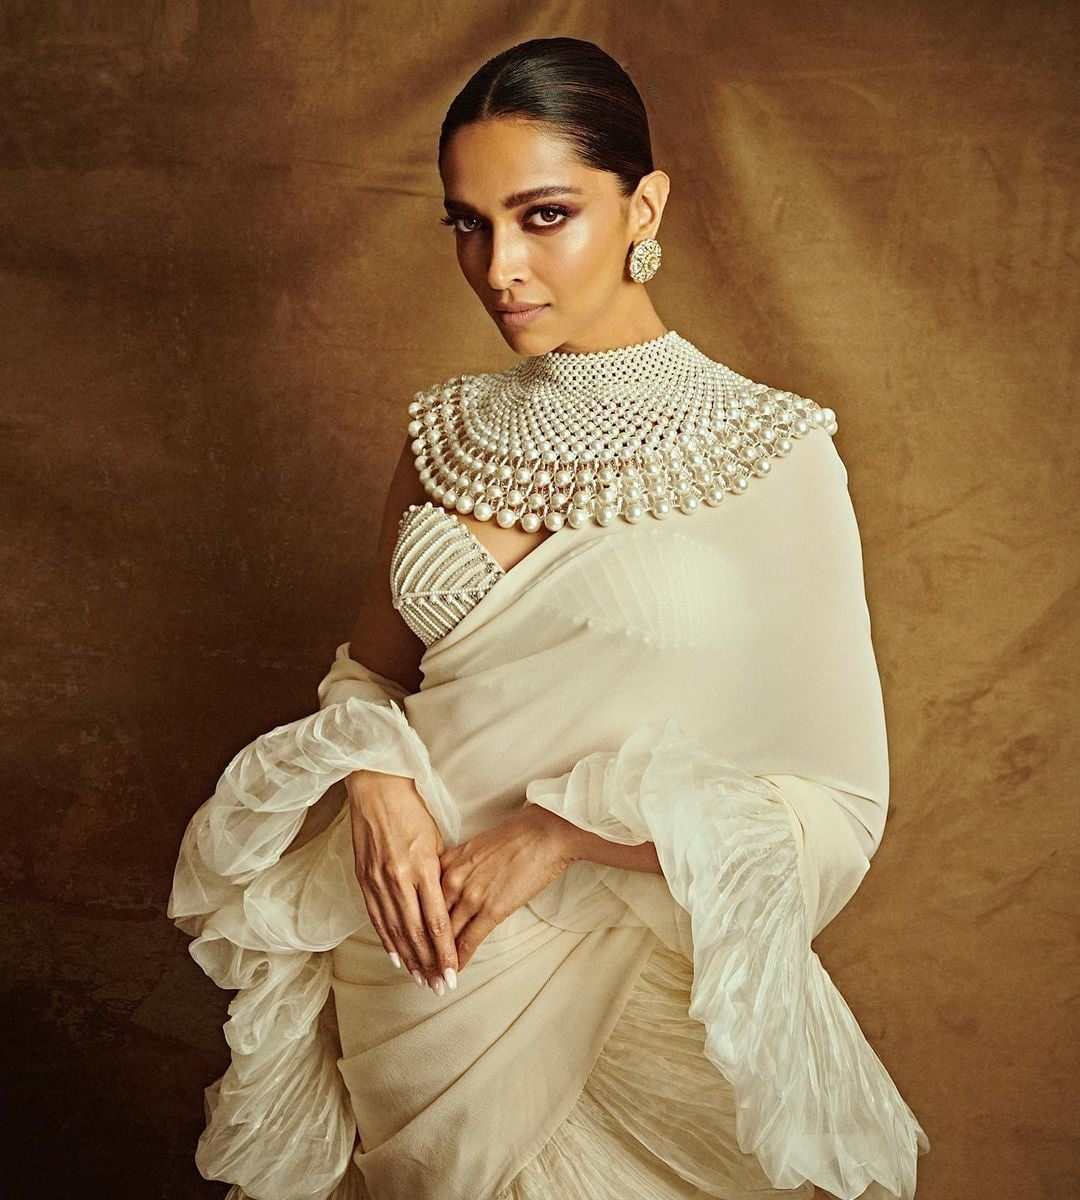 Deepika Padukones Handembroidered Statement Collar Made From 1200 Pearls  And 200 Crystals  News18